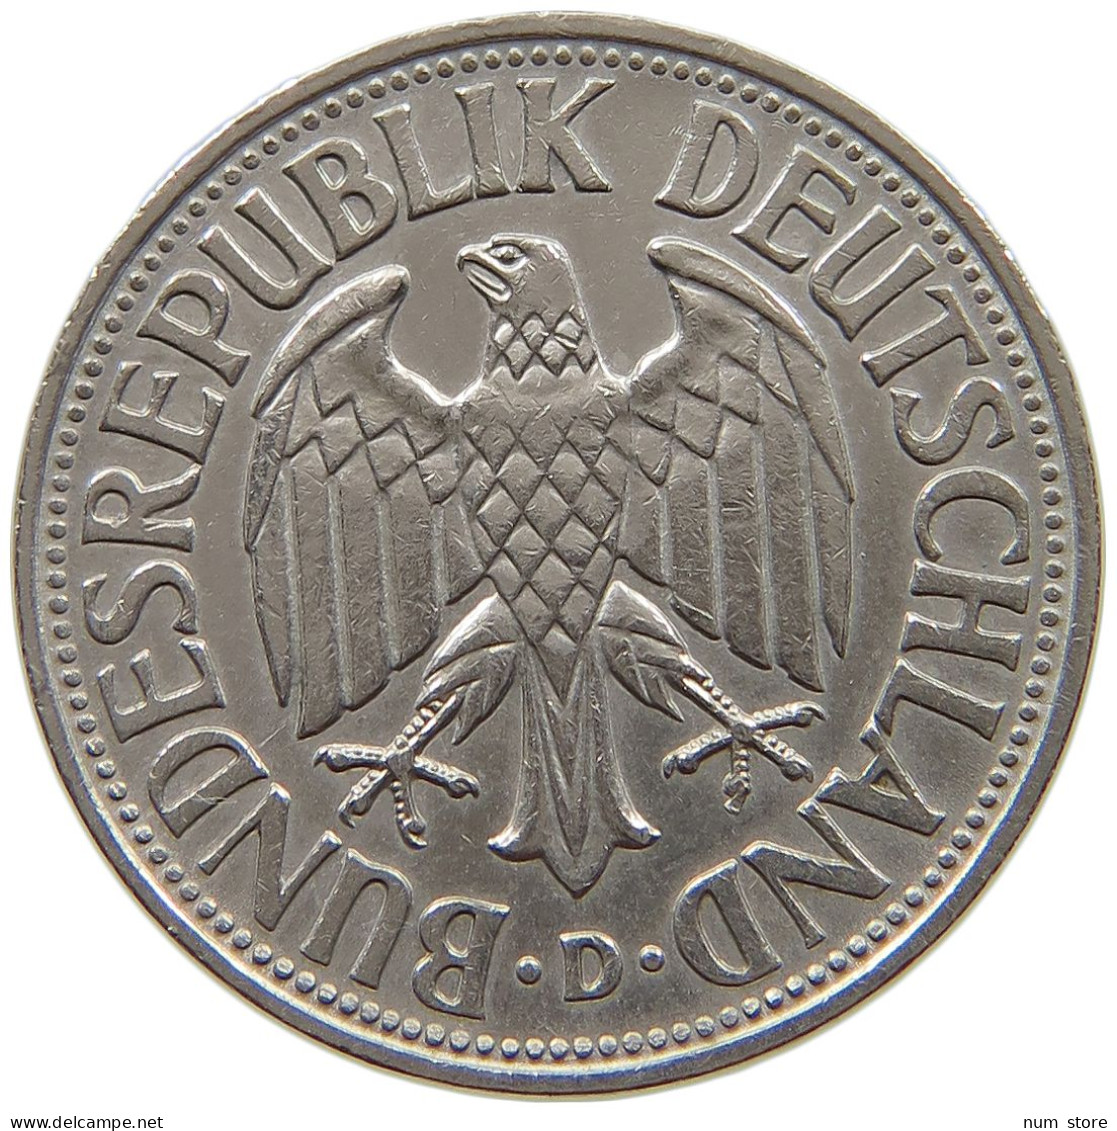 GERMANY WEST 1 MARK 1971 D #a069 0595 - 1 Mark